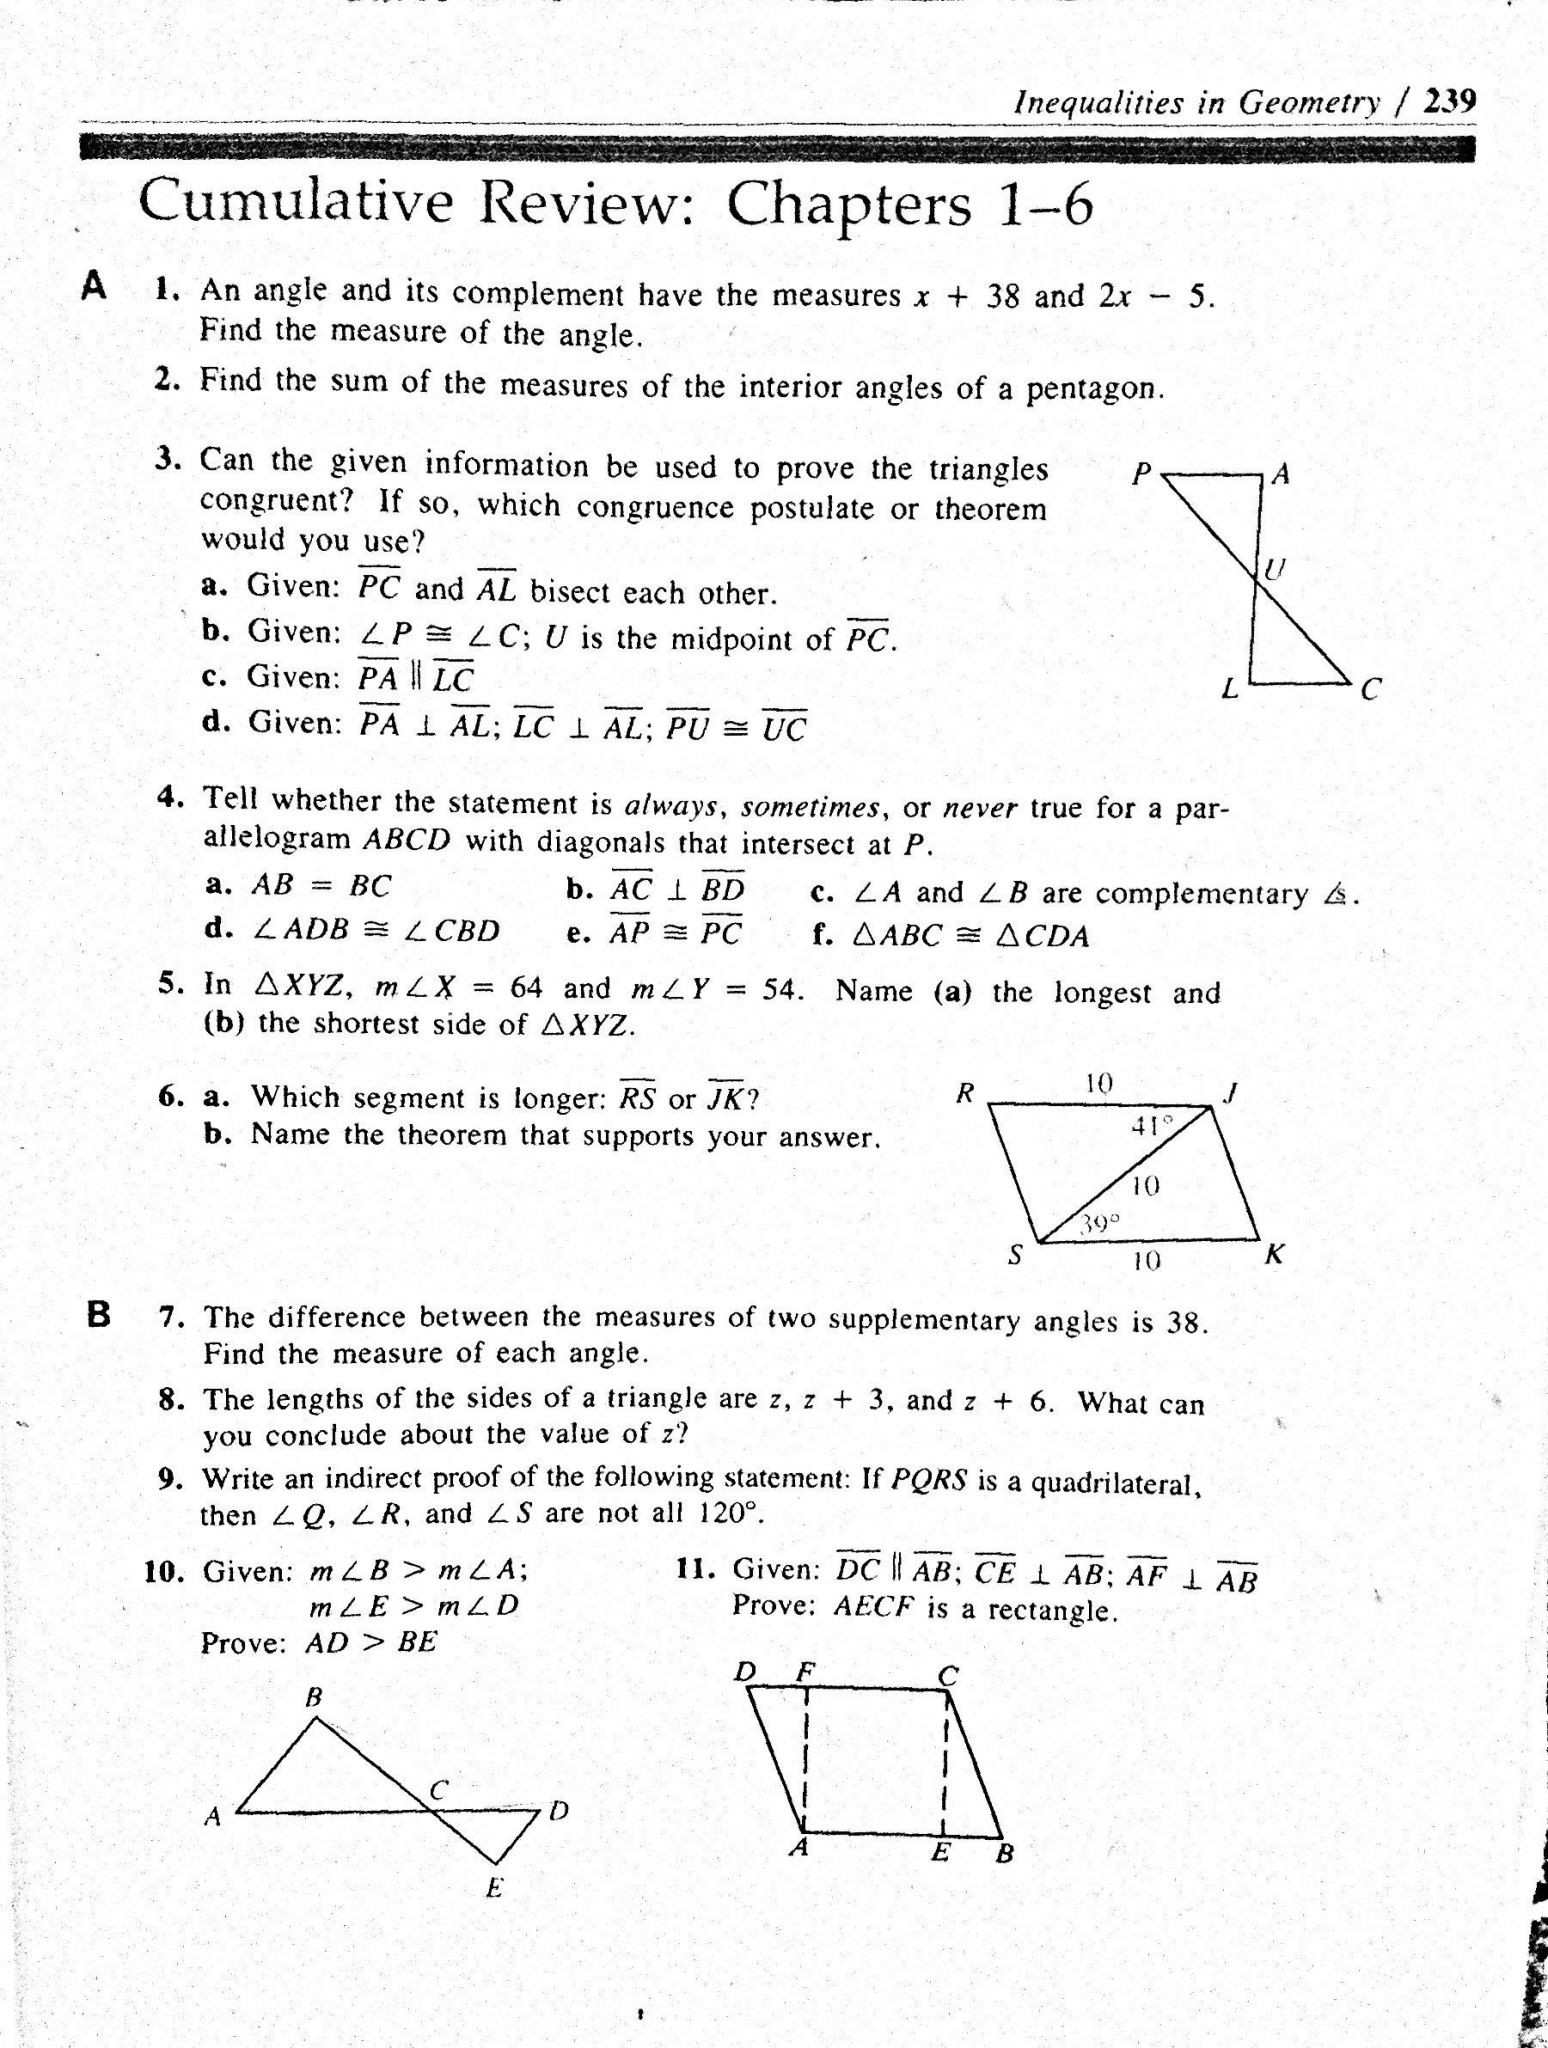 Conditional Statement Worksheet Geometry Geometry Conditional Statements Worksheet with Answers